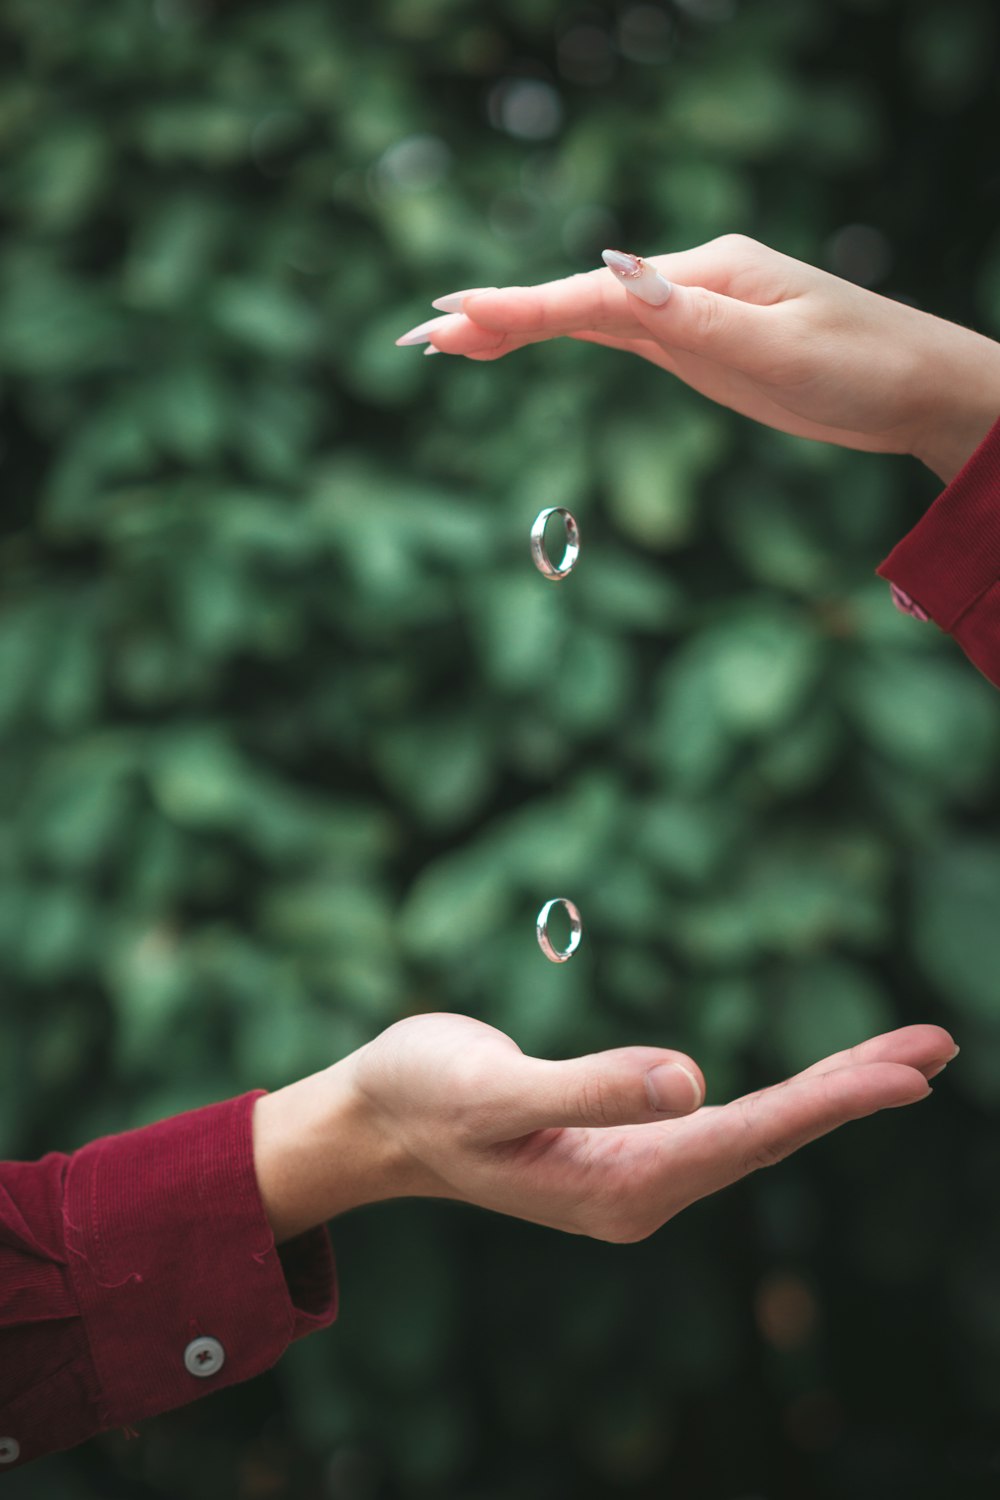 a person holding out their hands with soap bubbles in the air